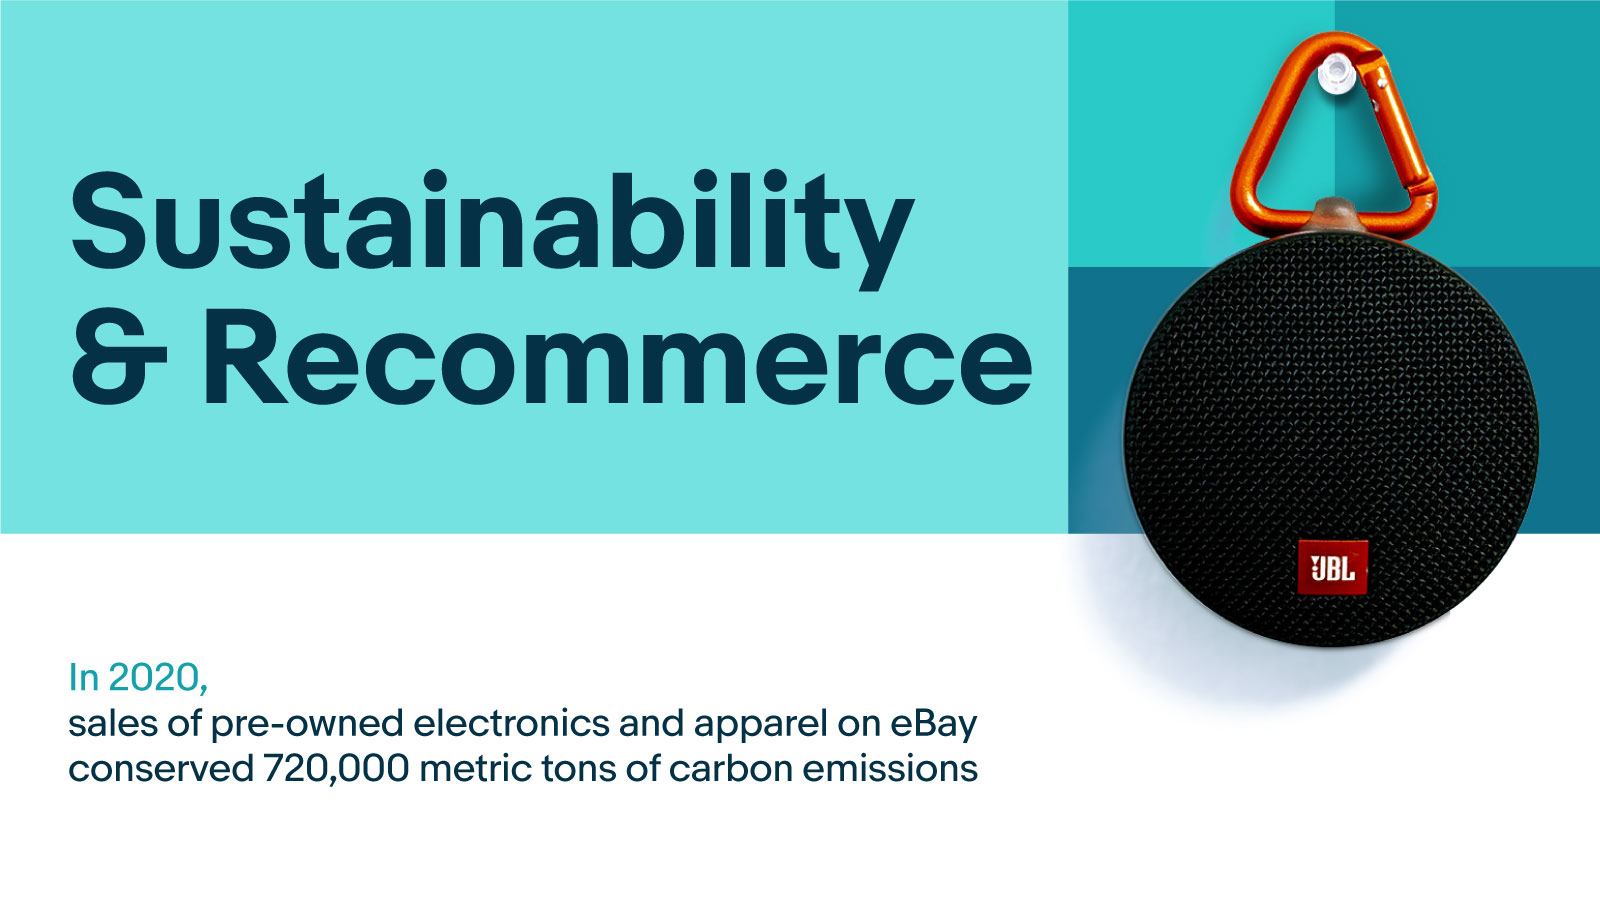 Sustainability is Responsible Recommerce